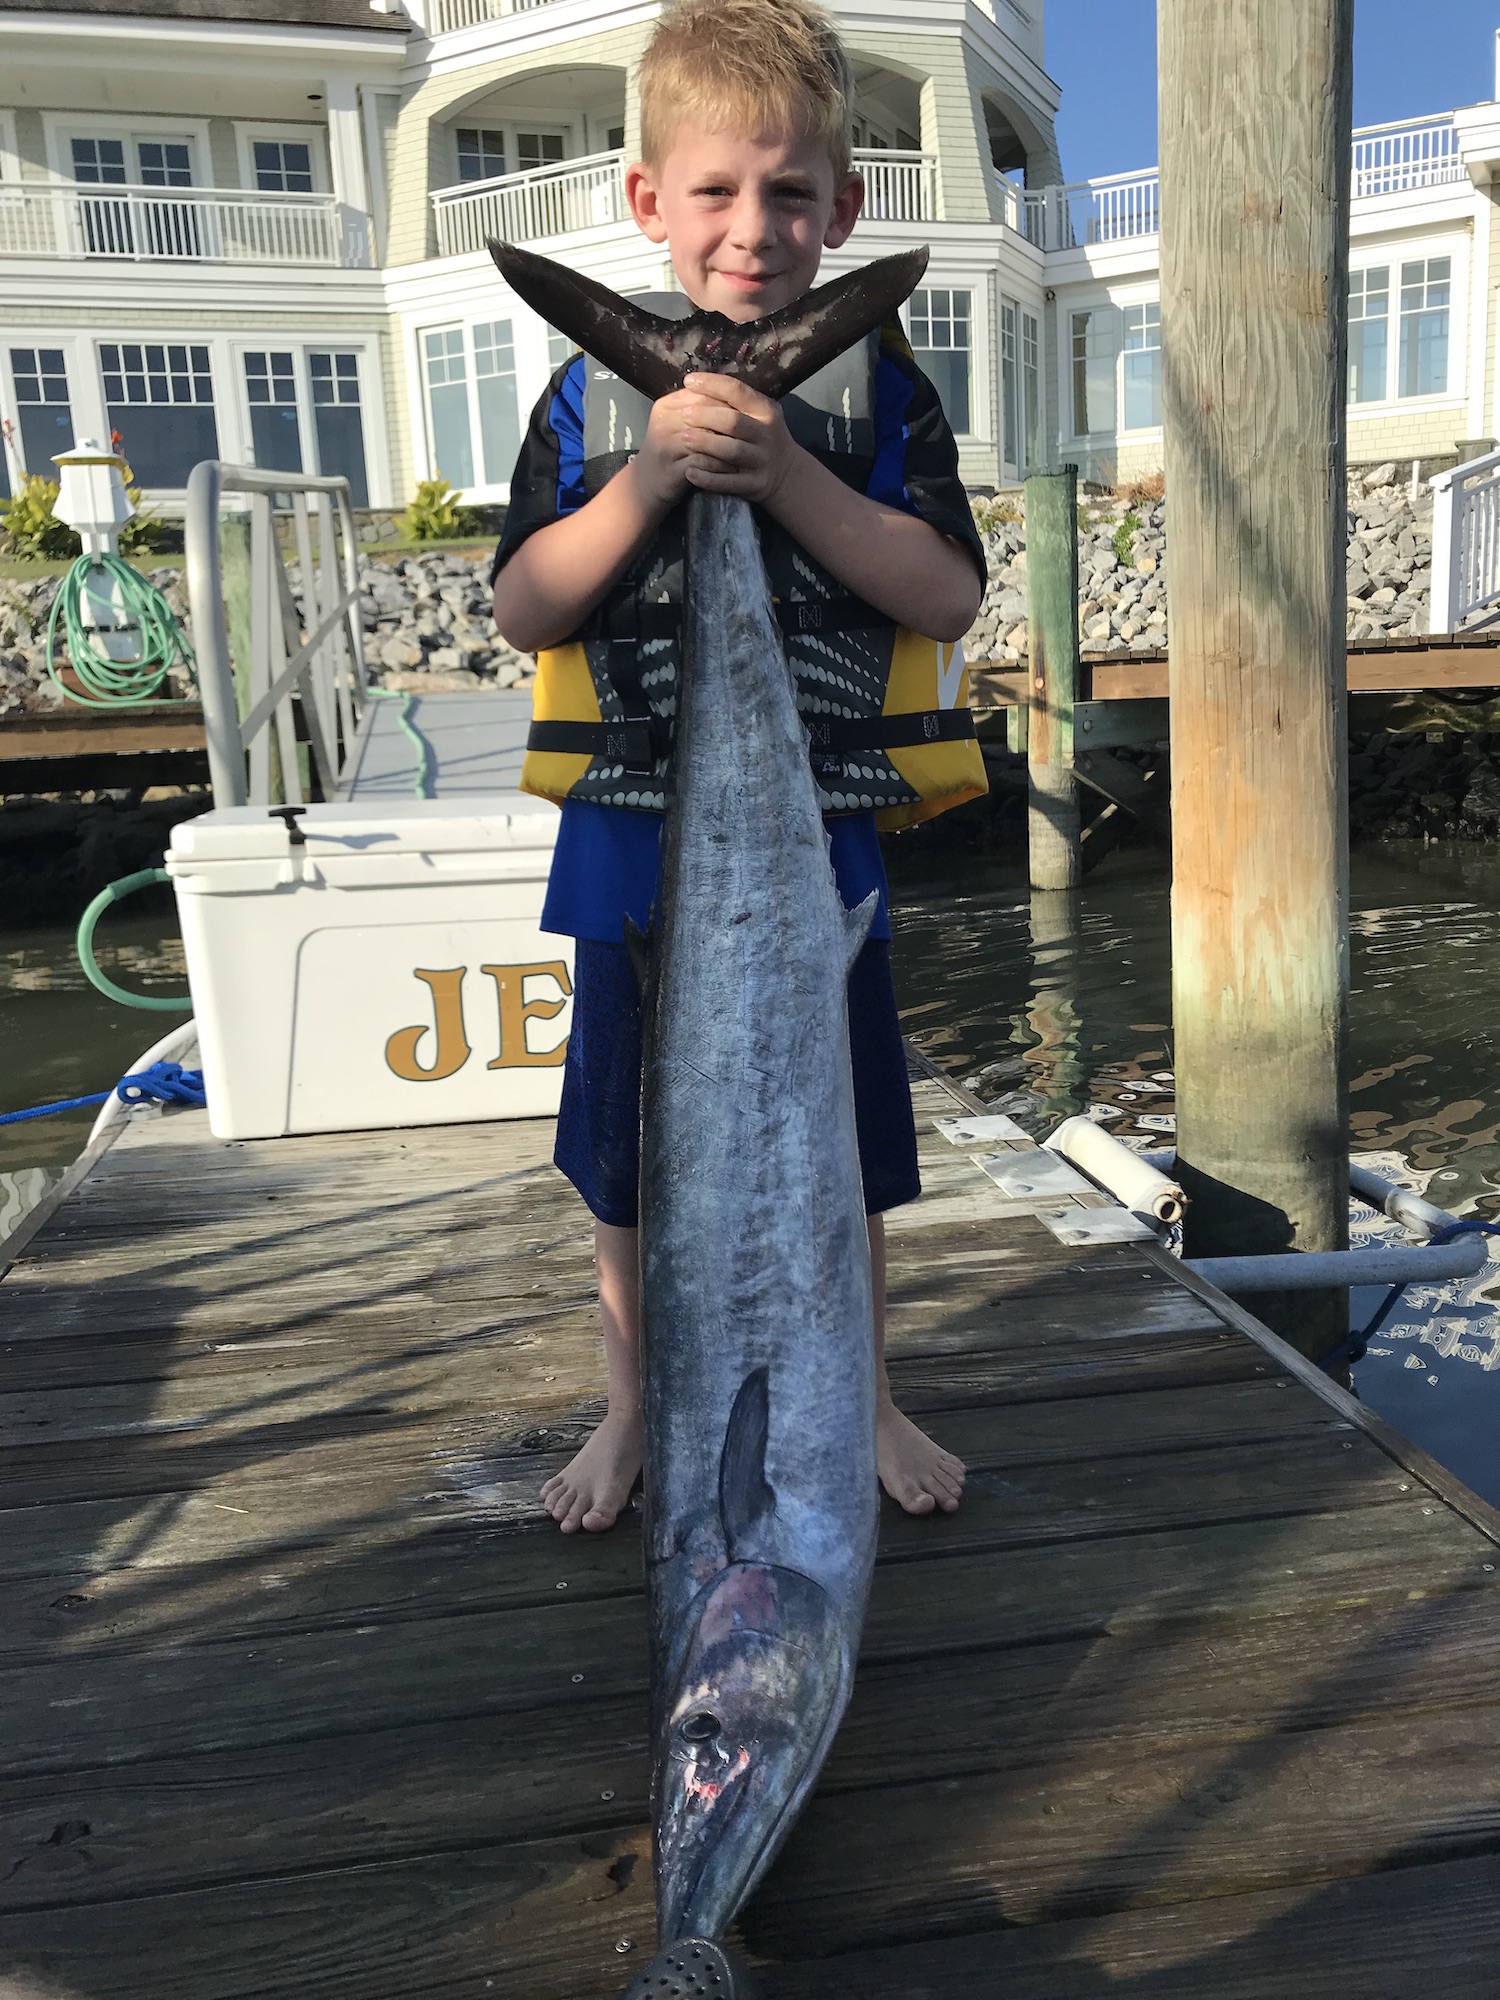 And a Wahoo For The Kid